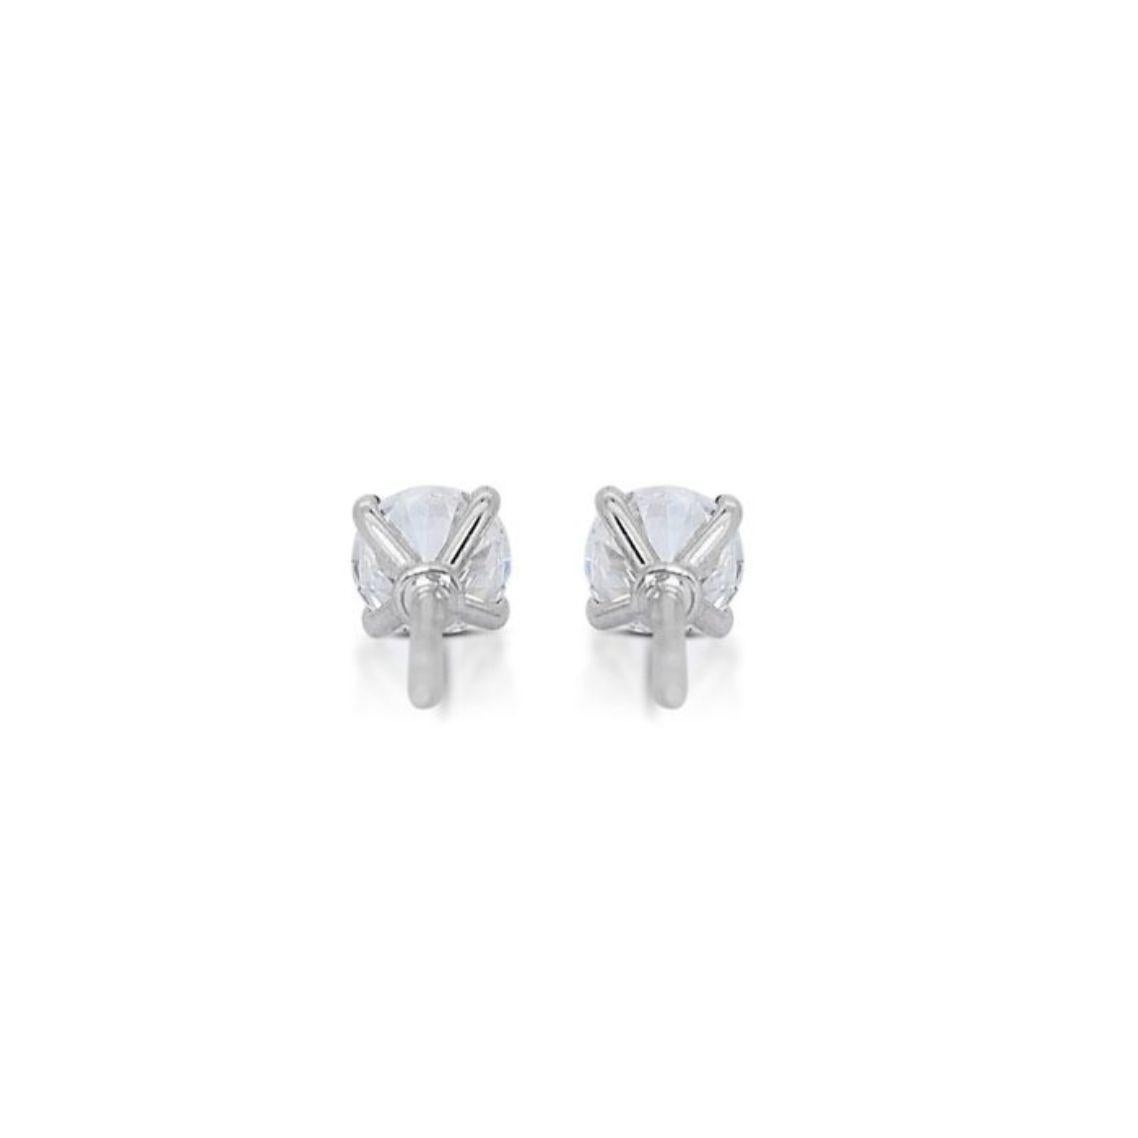 Dazzling 1.4 Carat Round Brilliant Diamond Stud Earrings in 18K White Gold For Sale 1